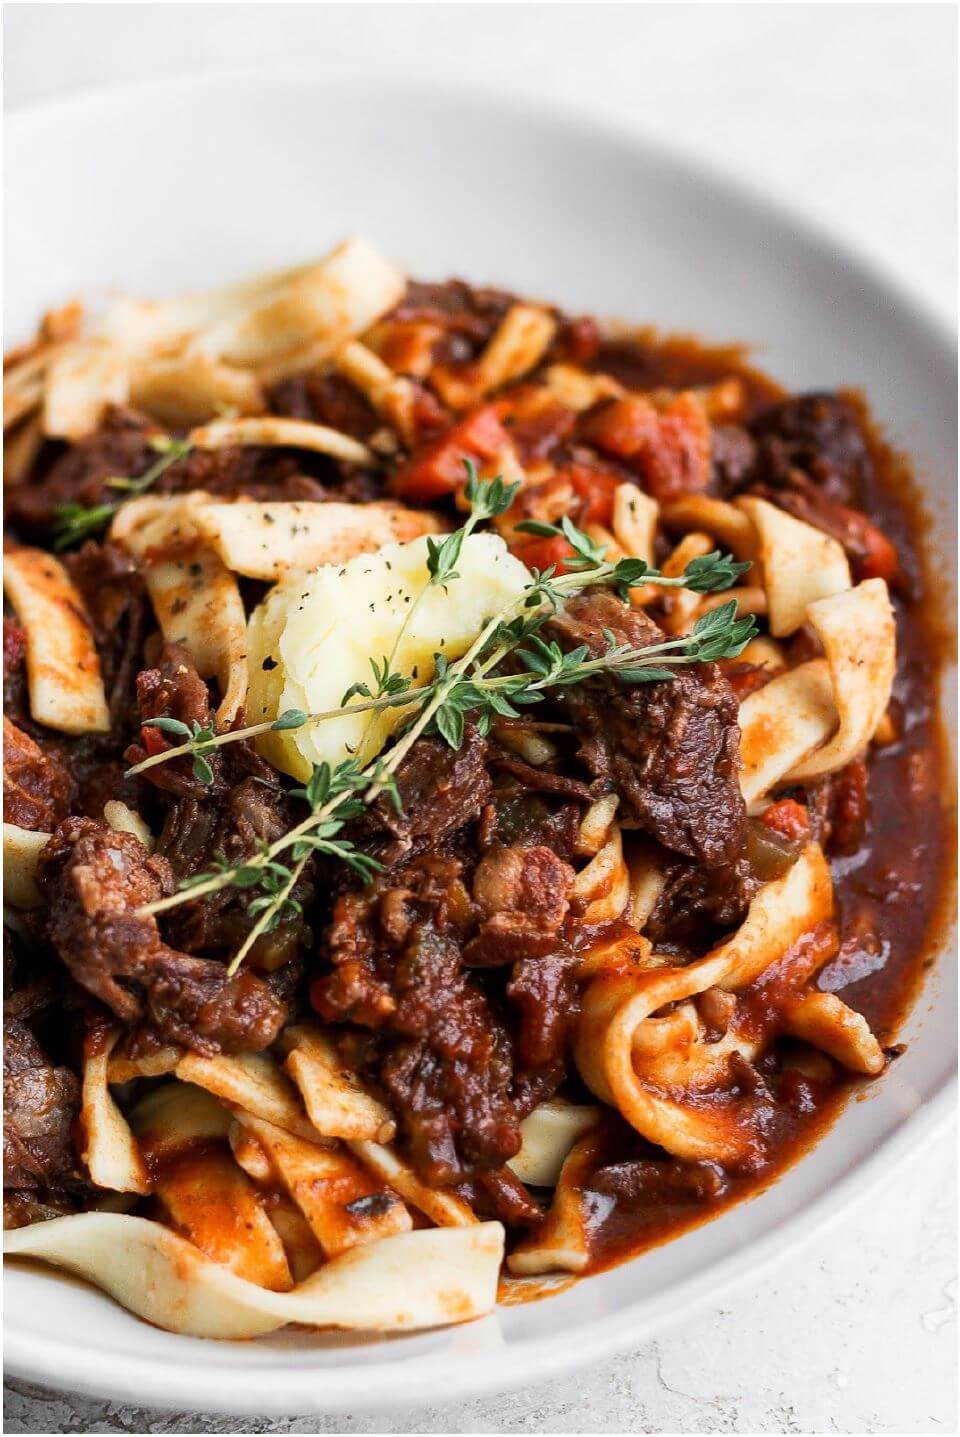 Slow Cook or Insta' Pot - This Beef Ragu is A Winner!